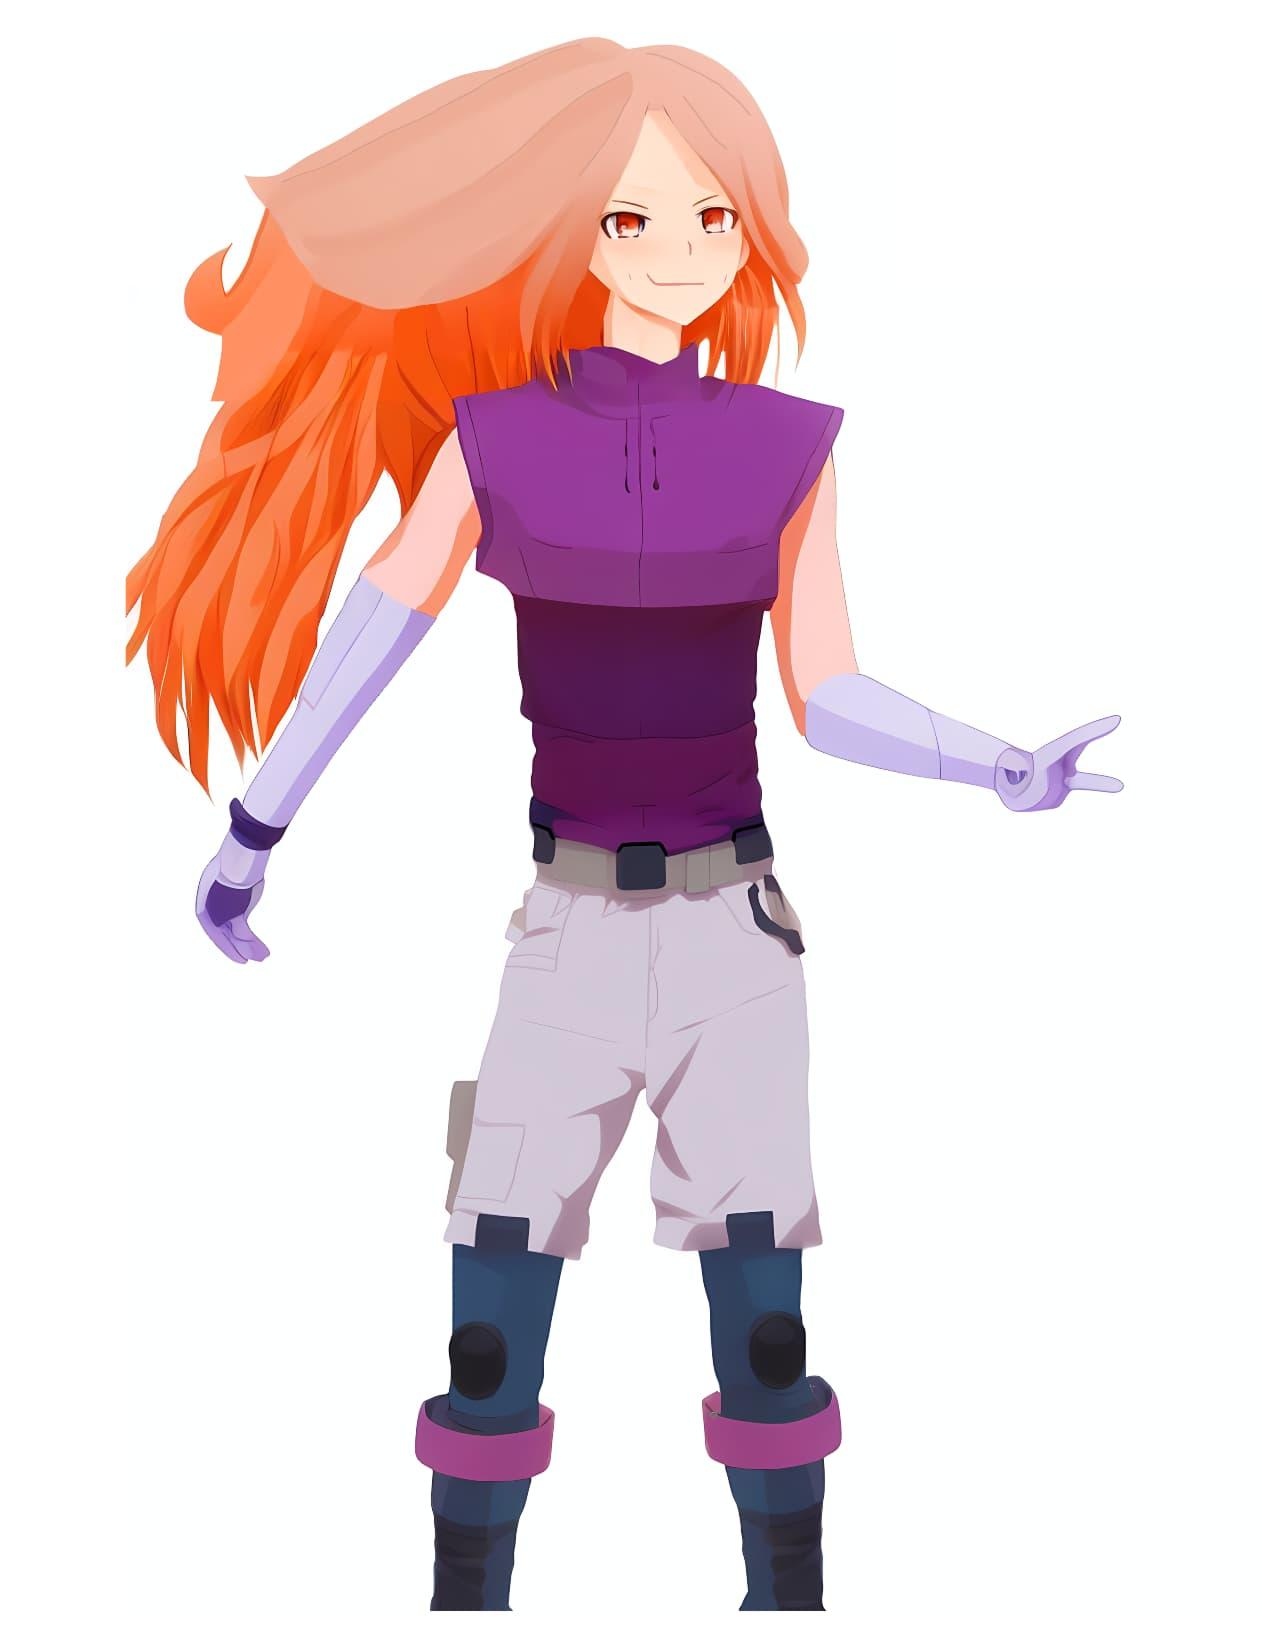 An orange-haired girl with red eyes and a smirk, wearing a purple top, lilac robotic gloves, and pink shorts